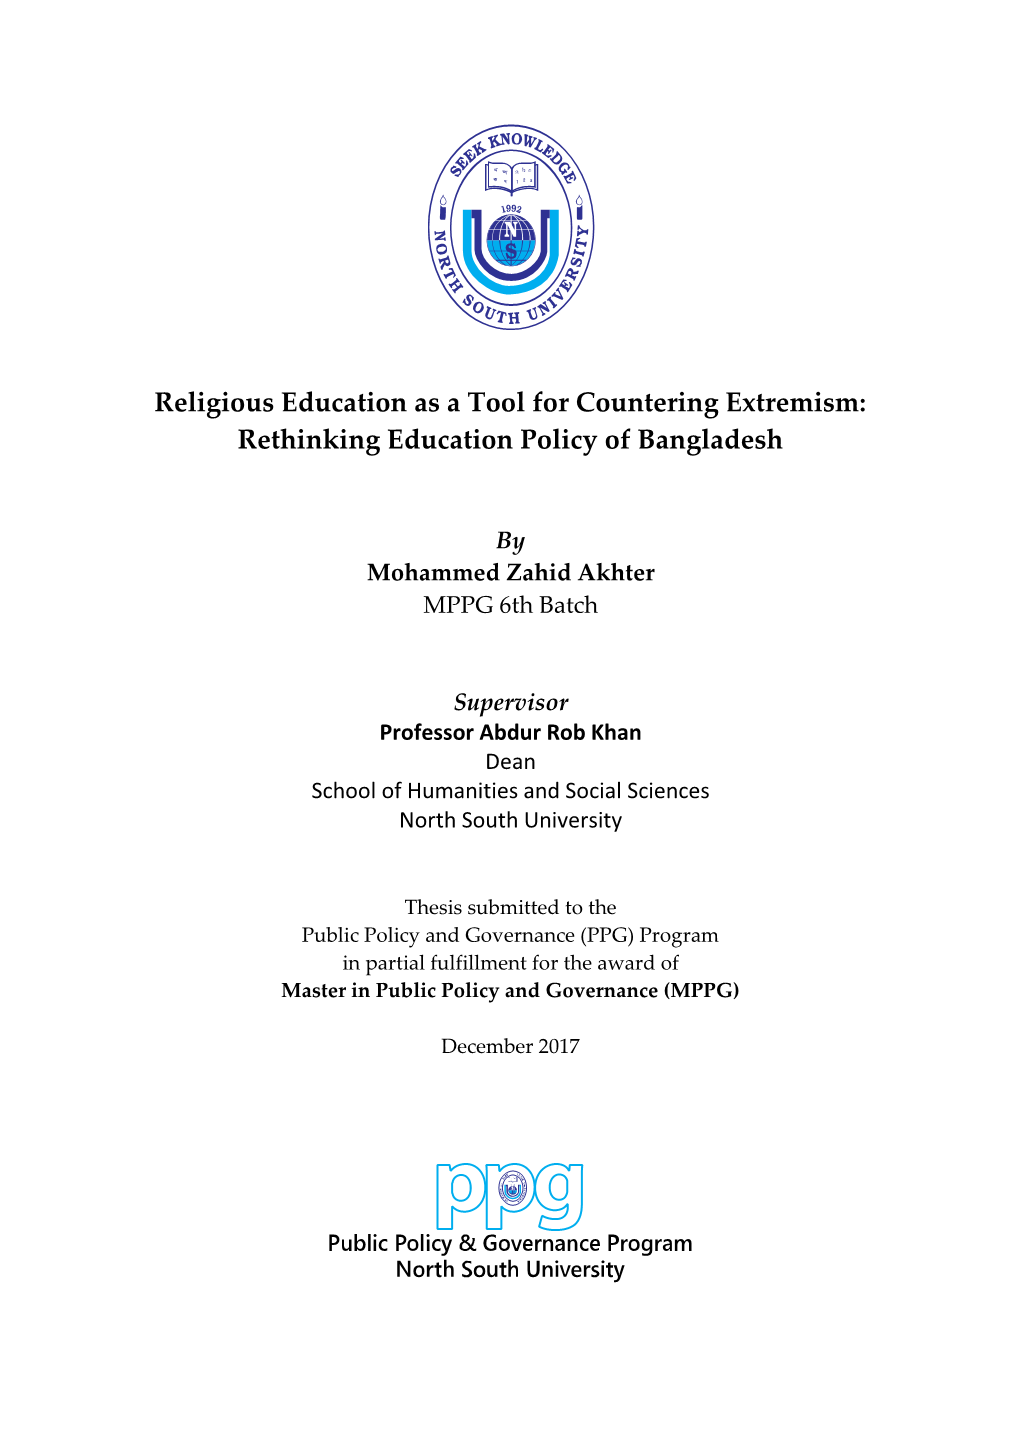 Religious Education As a Tool for Countering Extremism: Rethinking Education Policy of Bangladesh